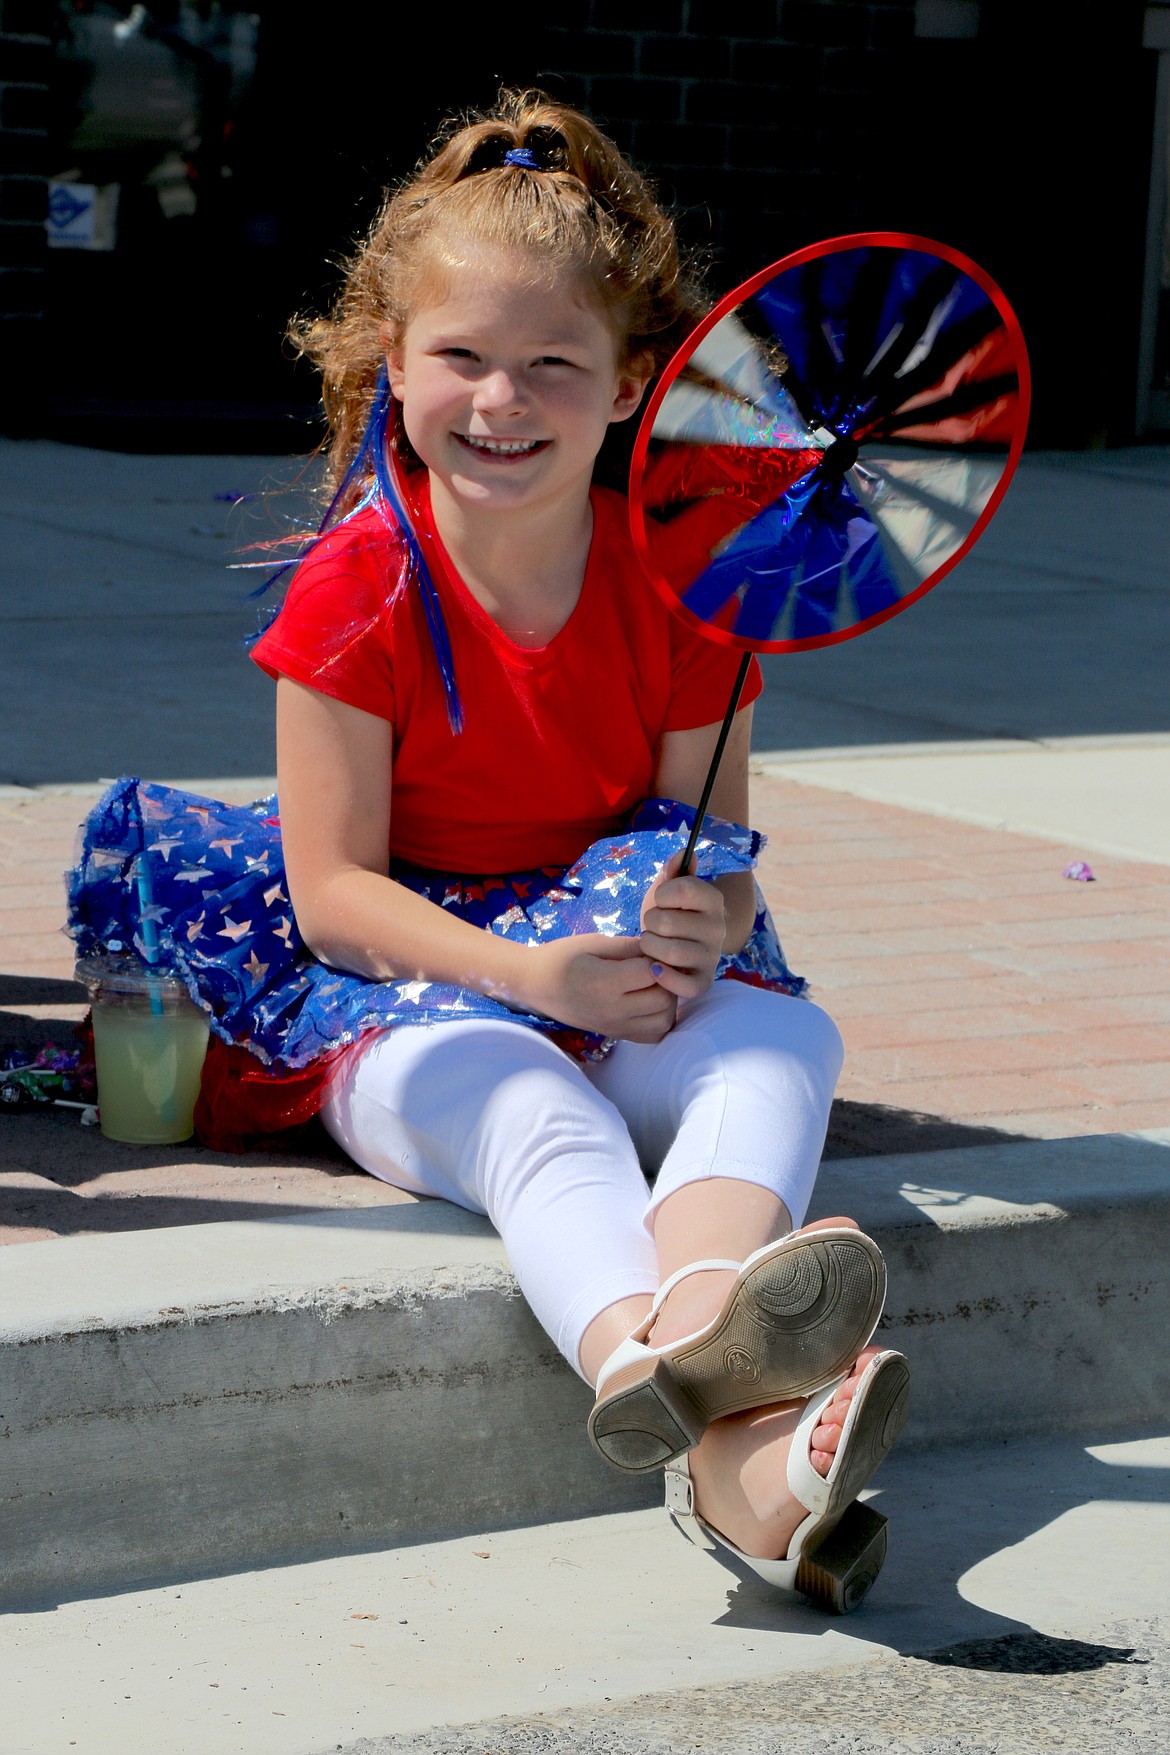 A young parade watcher has fun at Saturday’s Fourth of July parade in Sandpoint. Events were held by Save Independence Day Sandpoint after the Sandpoint Lions were forced to cancel their annual events due to the COVID-19 pandemic.